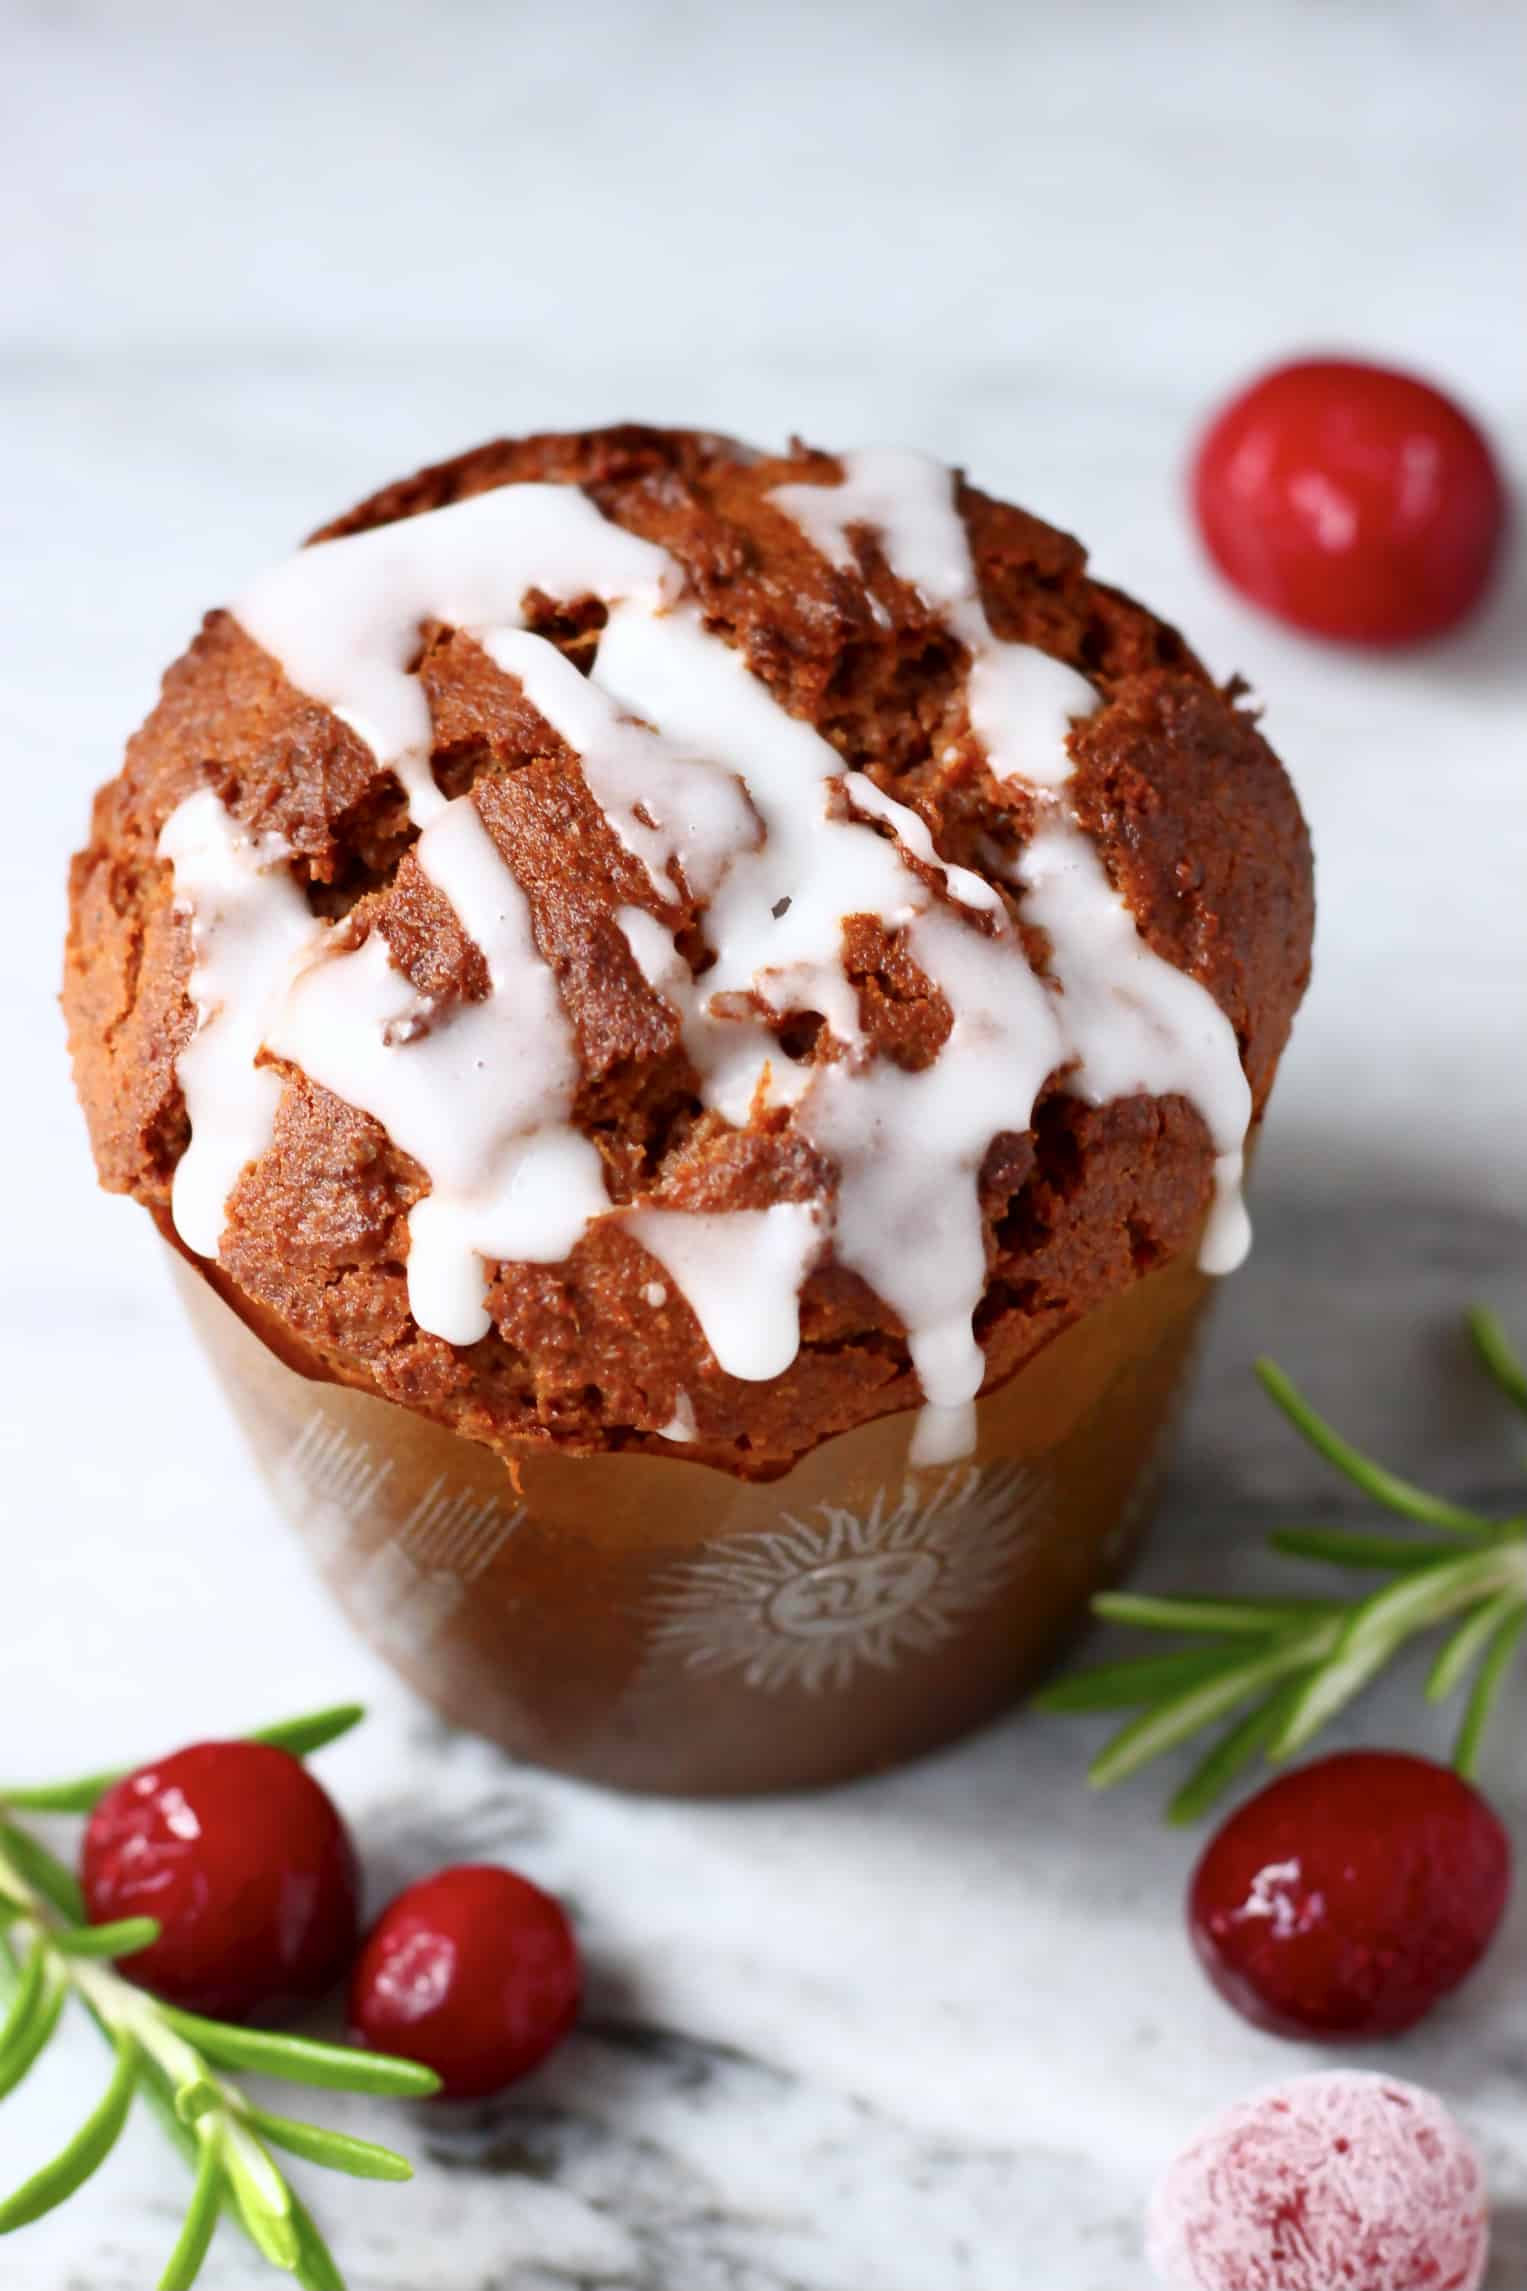 A gluten-free vegan gingerbread muffin in a brown muffin case drizzled with icing